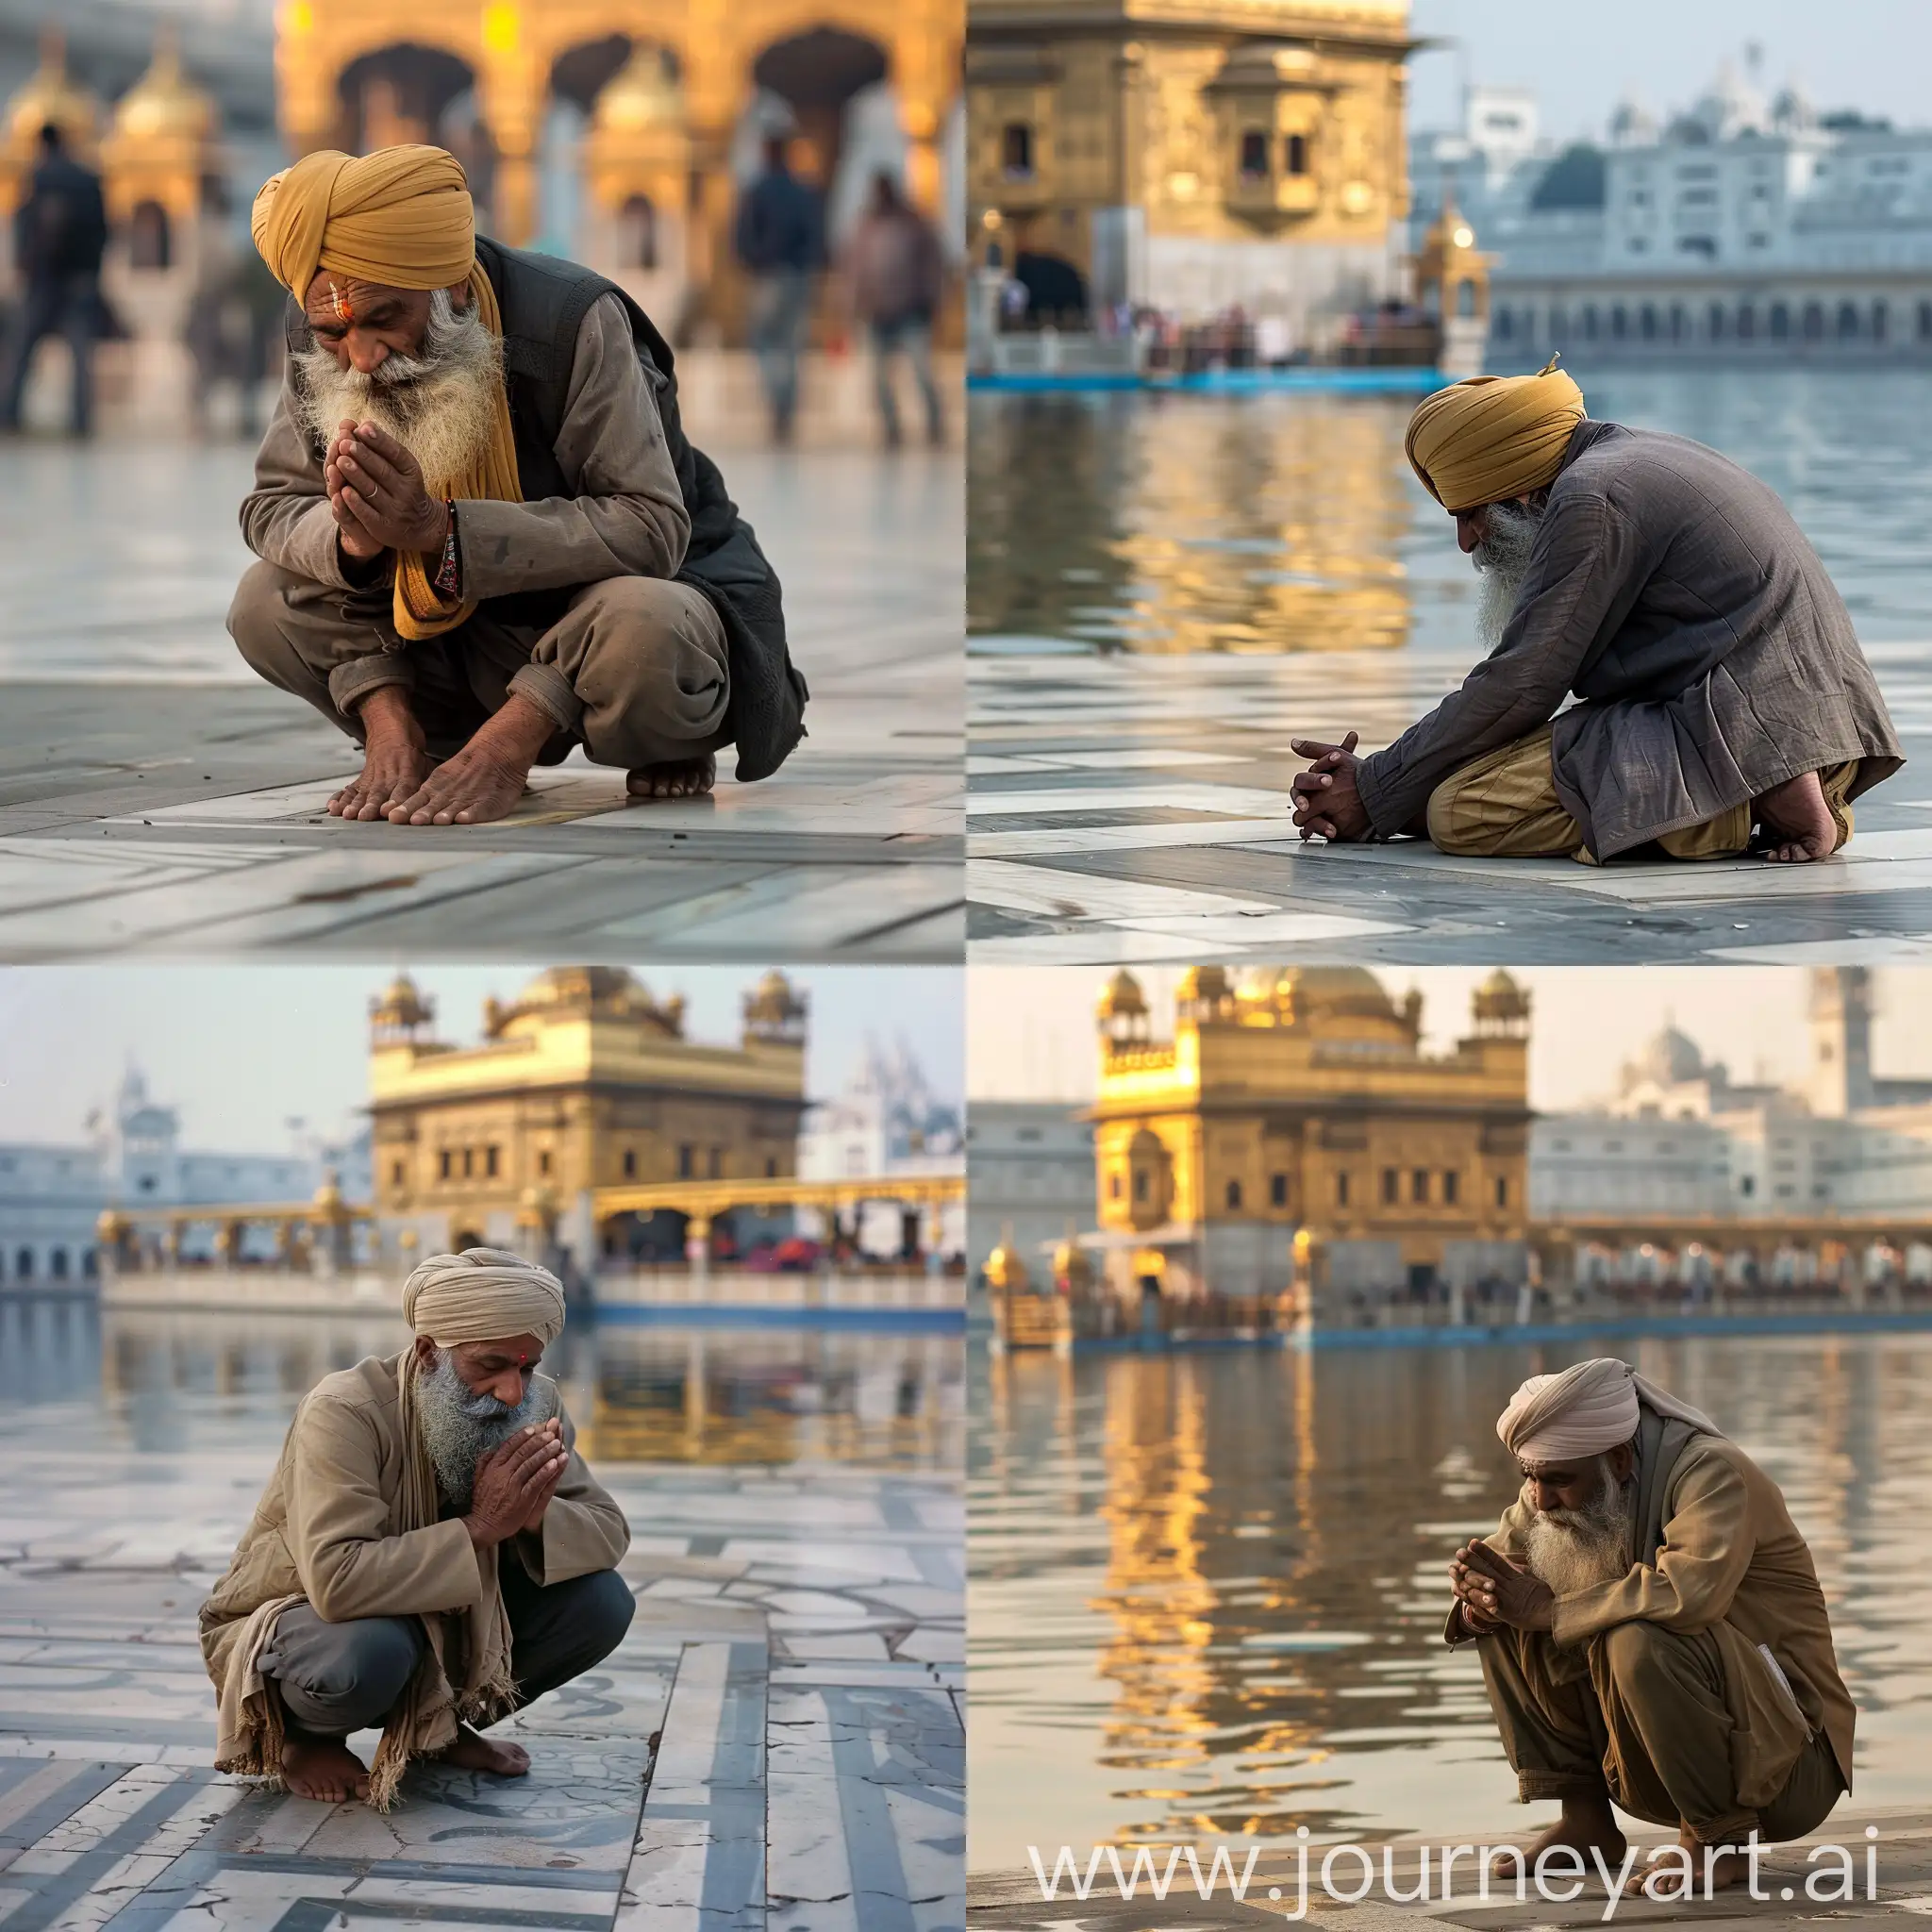 Sikh-Man-Begging-with-Folded-Hands-at-Golden-Temple-India